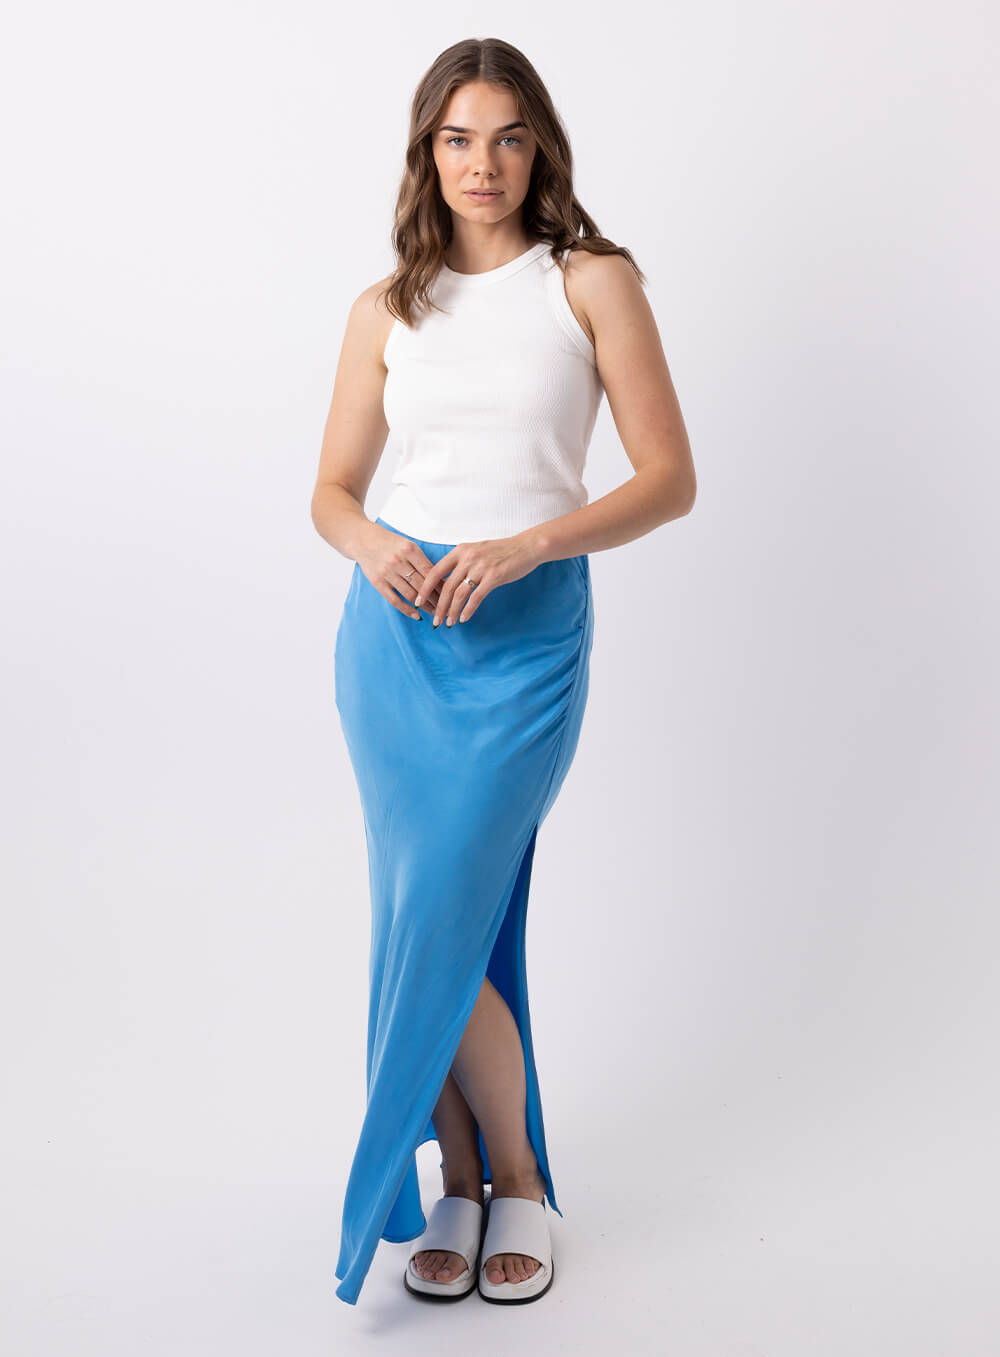 The Allira Cupro skirt is made from a soft feel cupro fabric and features a side split, side rouched panel to create a draping effect through the hip and is a full length skirt